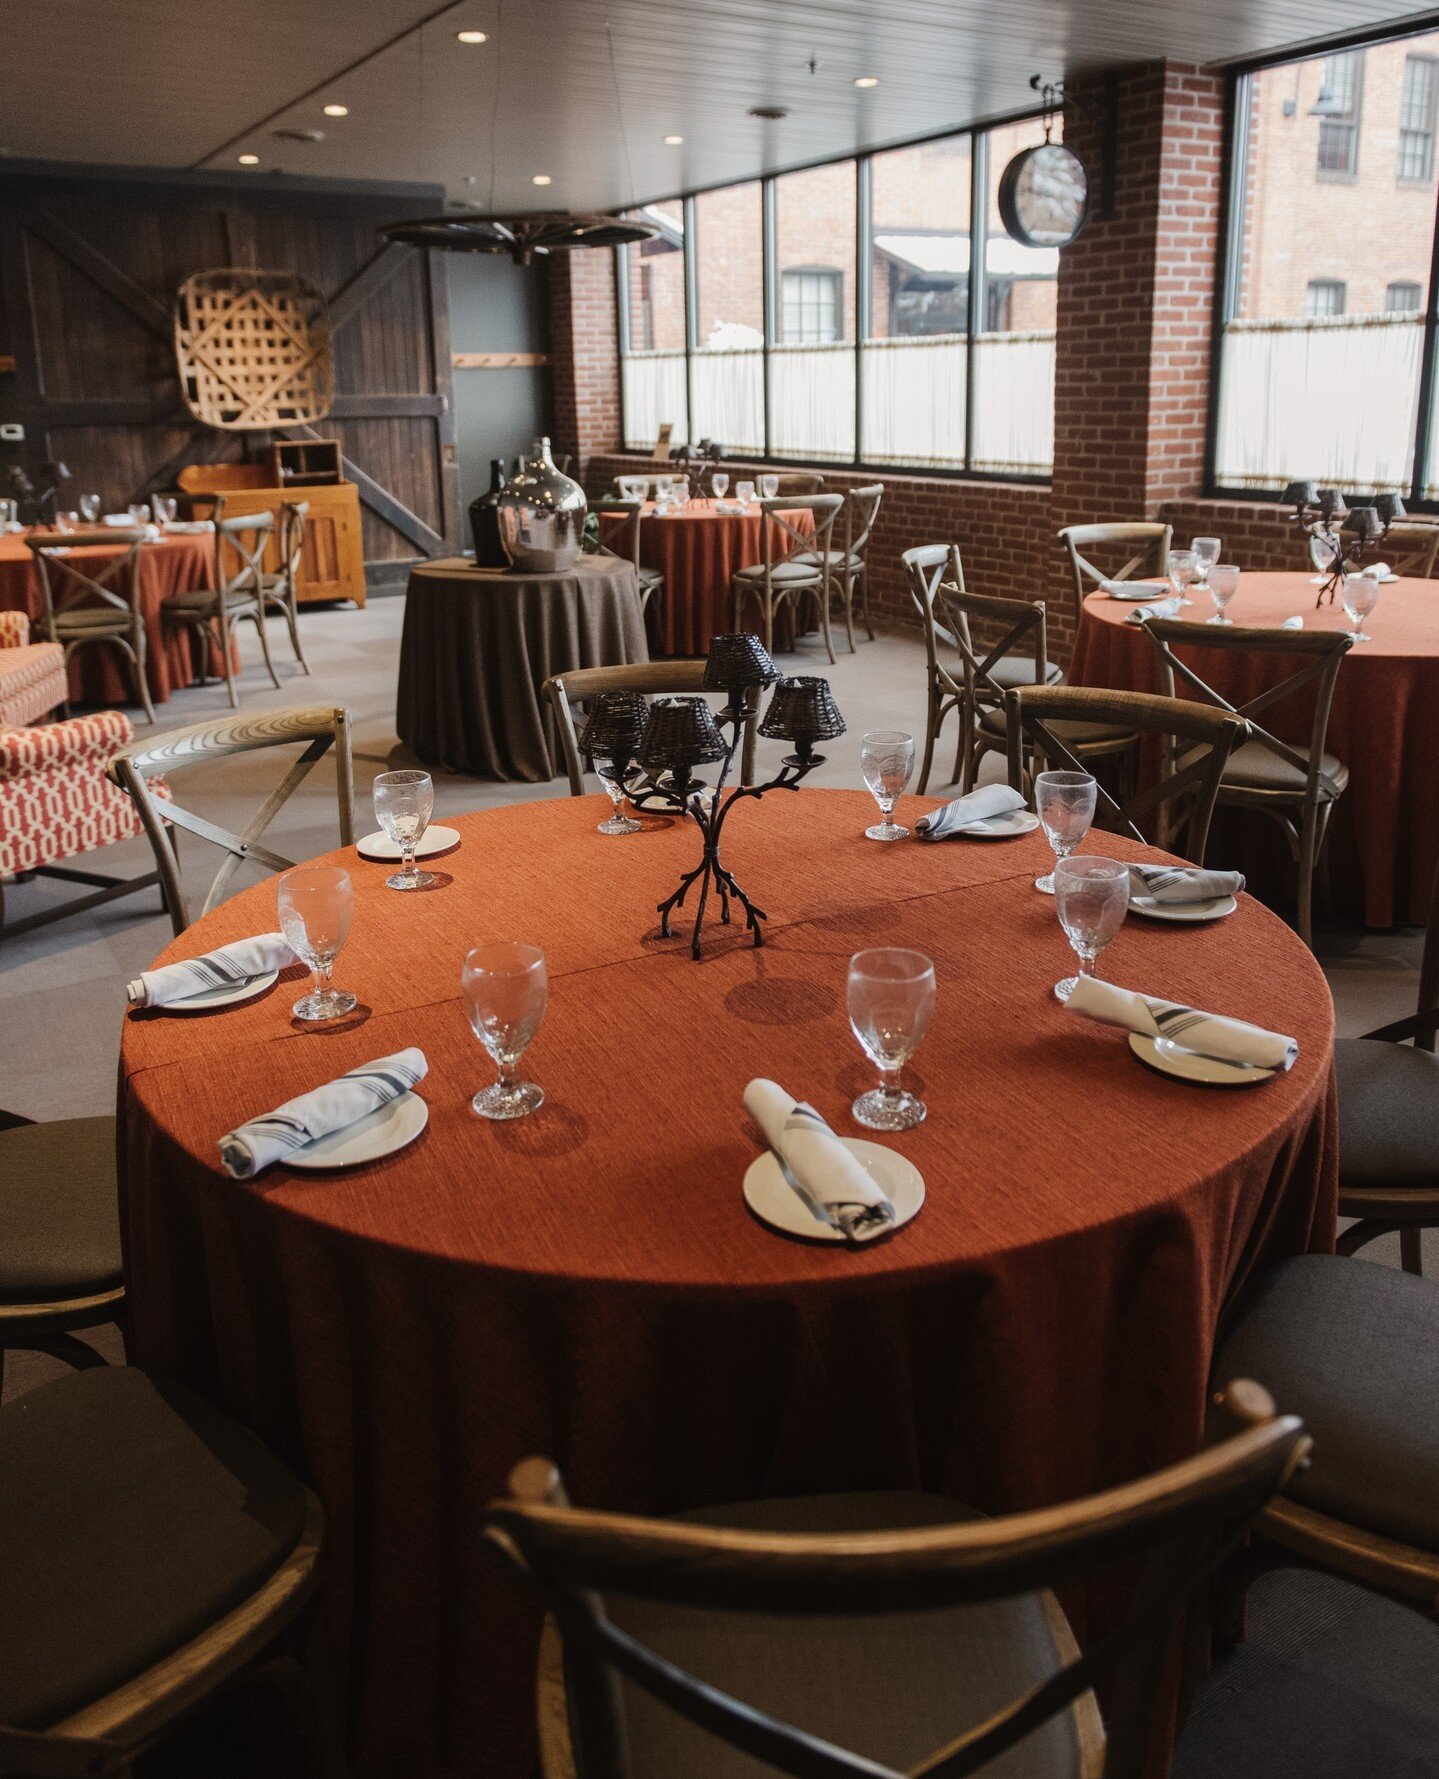 Looking for a private event space that still gives you a flexible menu for your guests? The 1865 Room is adjacent to the Cork &amp; Cap lobby and allows you to host up to 30 guests with a limited menu from Cork &amp; Cap! ⁠
⁠
#lancasterpa #corkandcap